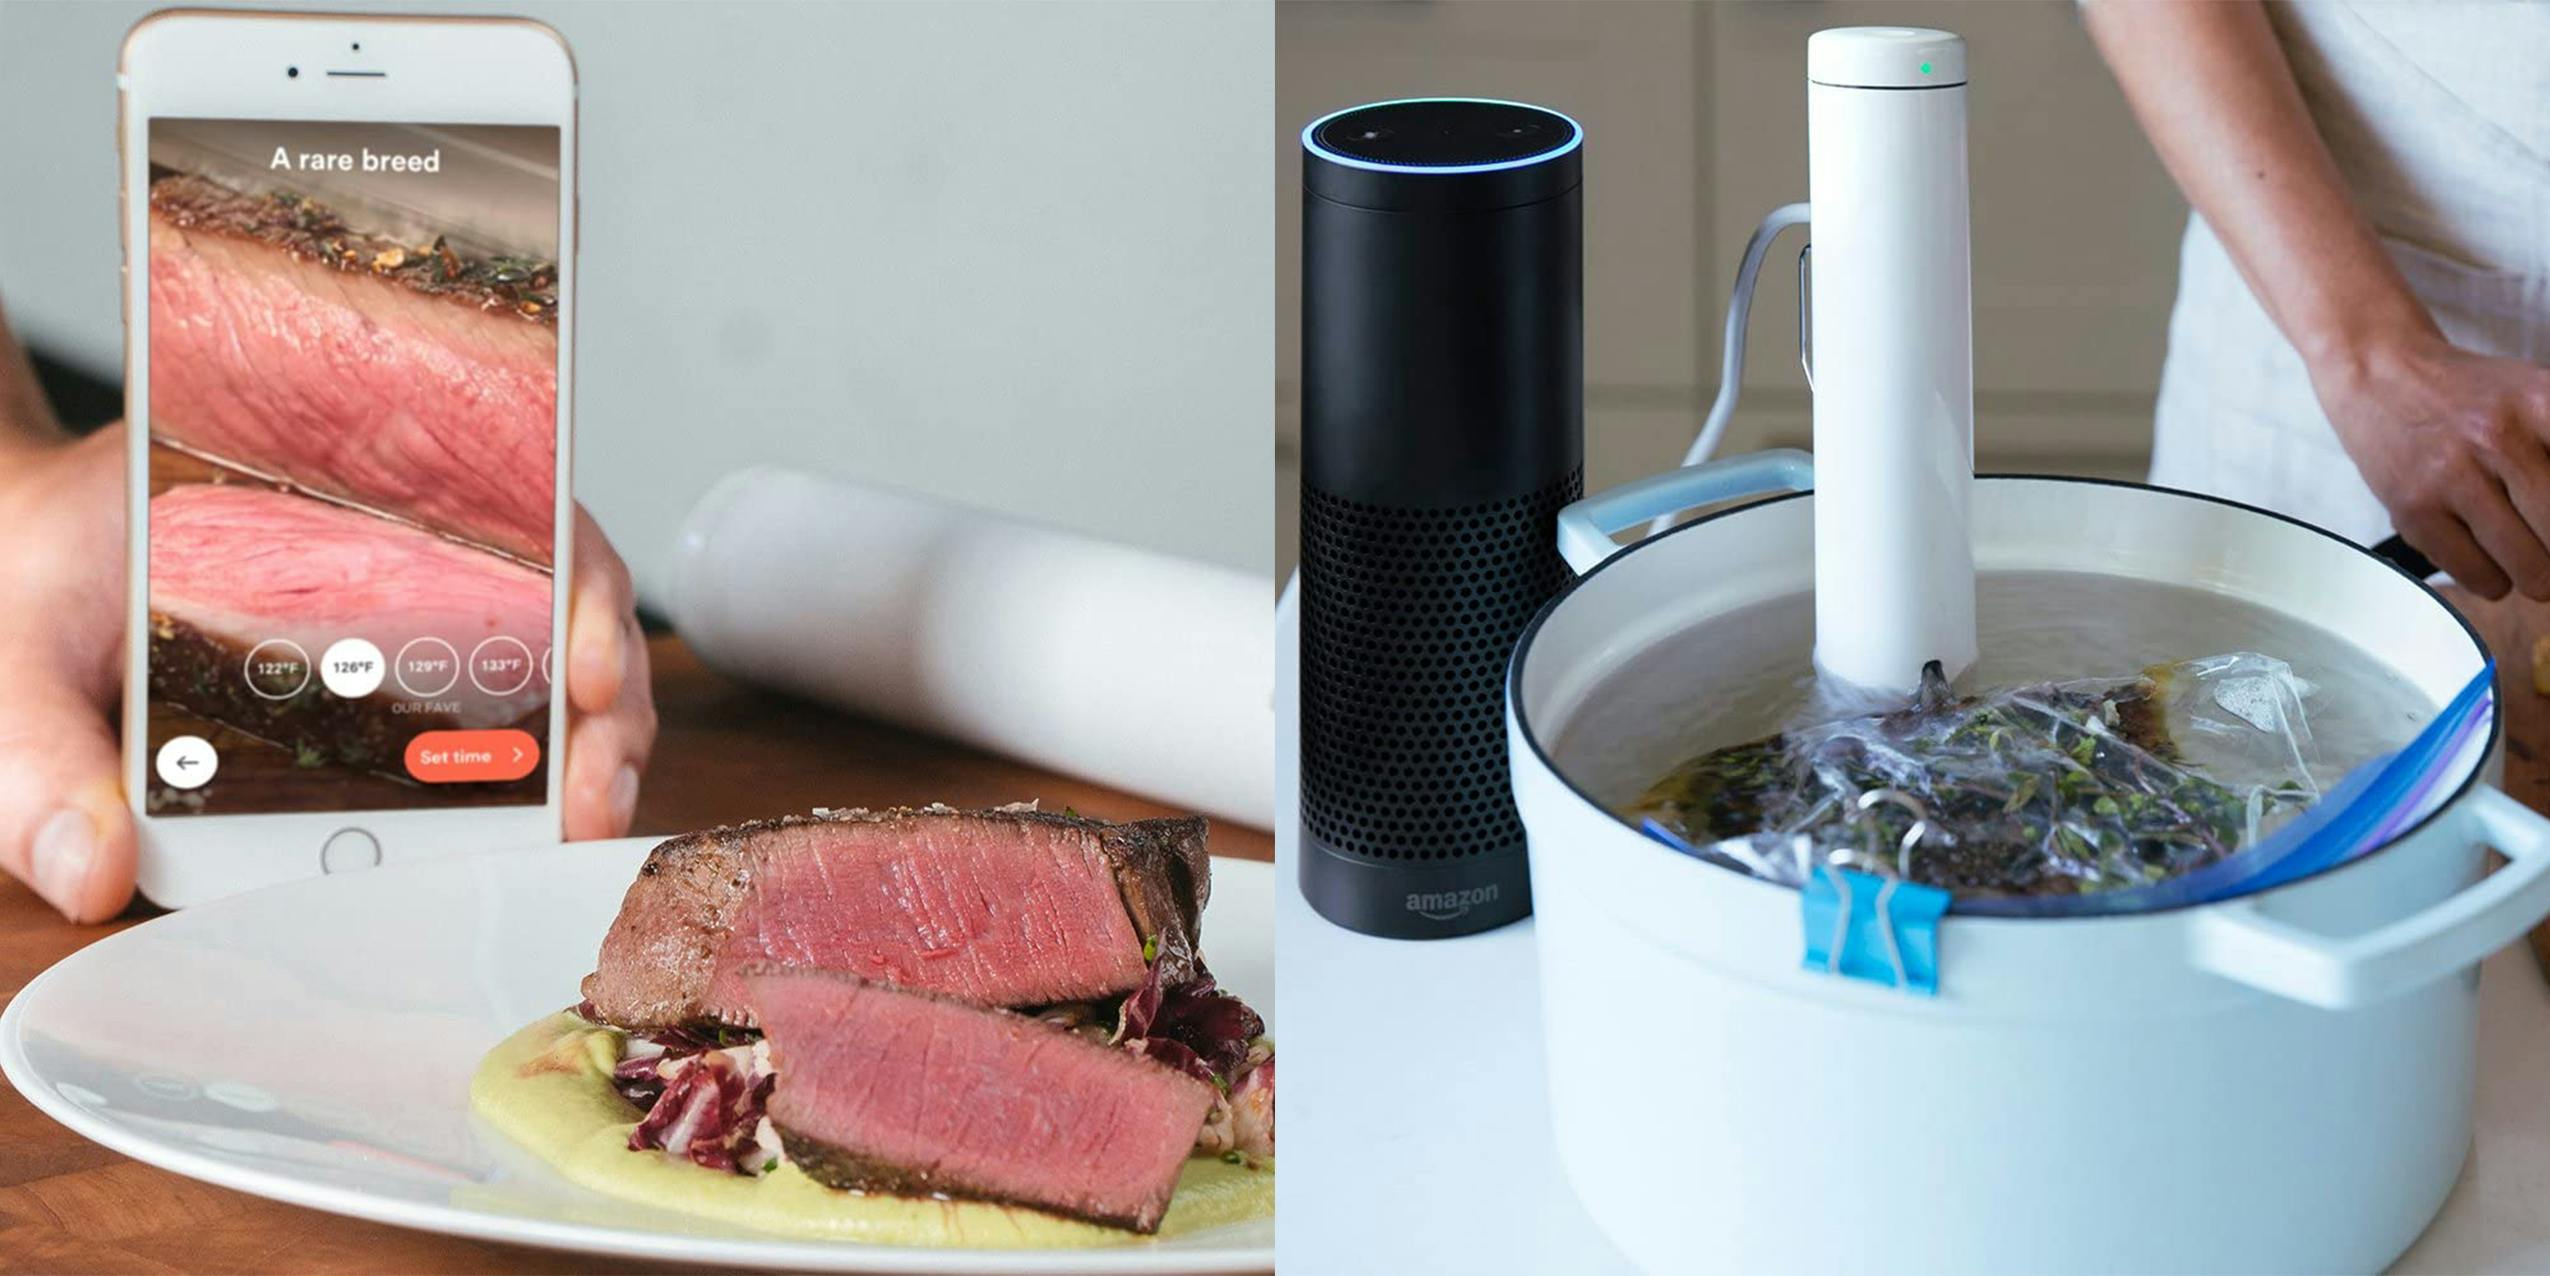 Joule sous vide kitchen gadget in use.